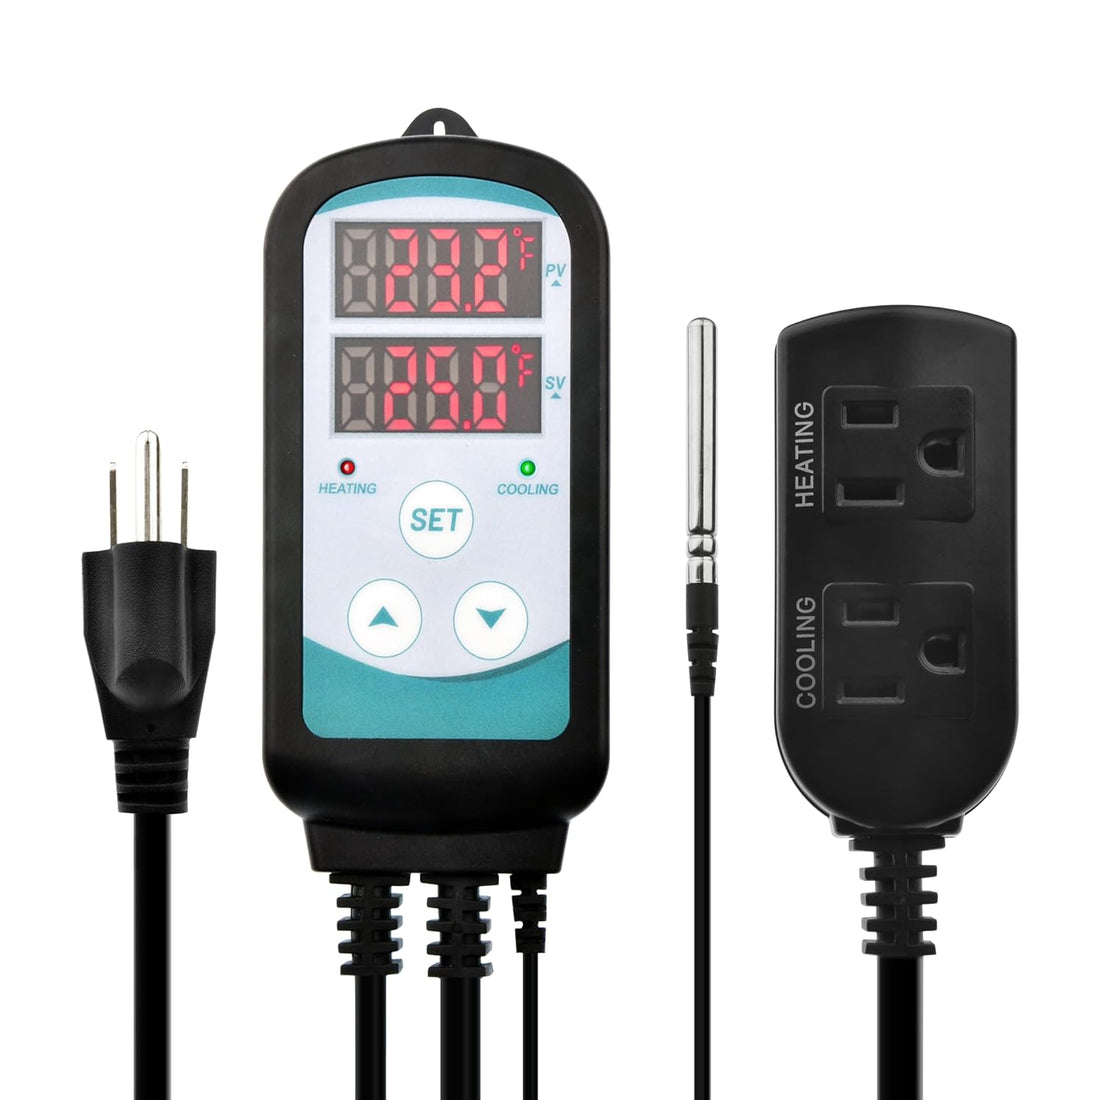 Digital Temperature Controller,Dual Digital Temperature Controlled Outlet,Thermostat Plug,Greenhouse Heater with Thermostat,110-240V 1500W ,Thermostat with Dual LED Display